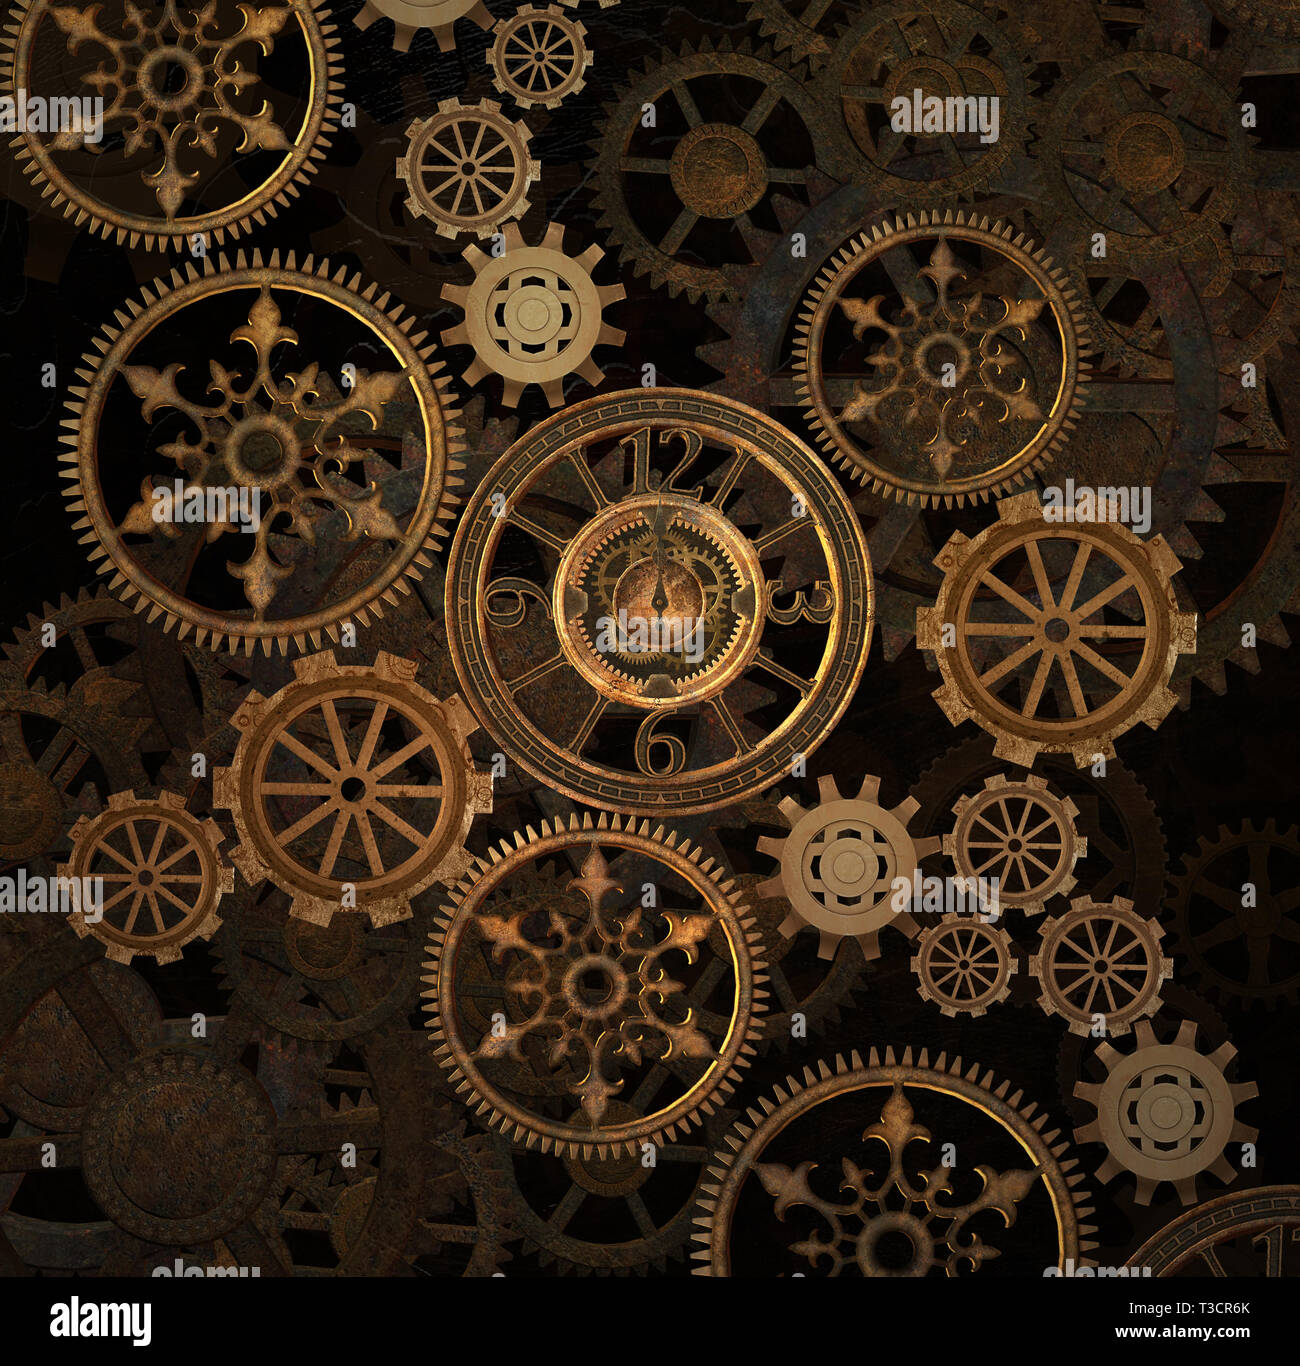 Steampunk intricate gears and cogs background Stock Photo